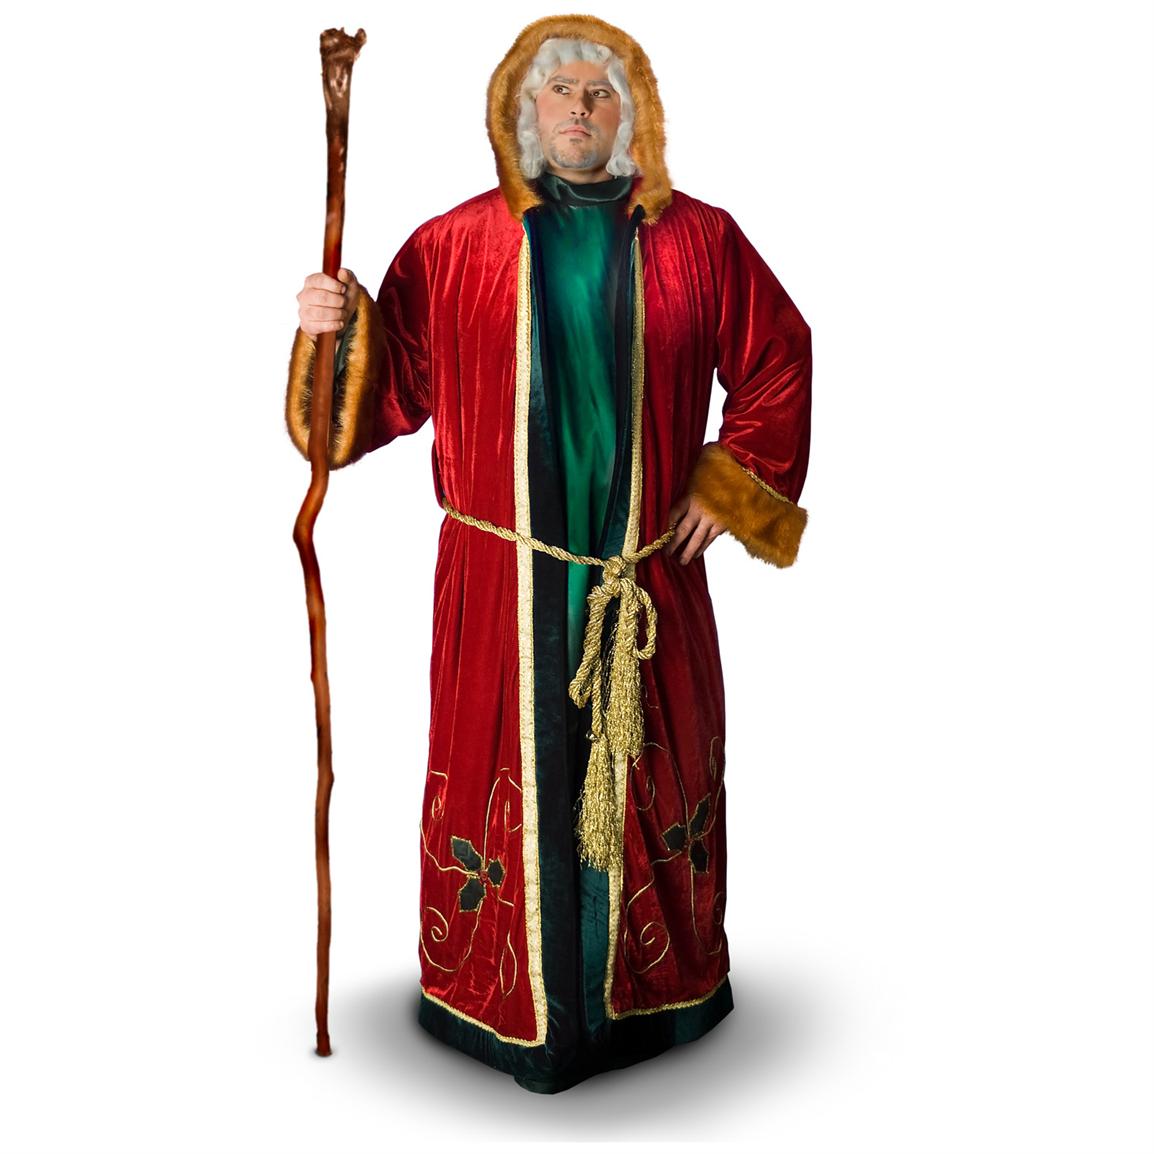 Sunnywood Old World Santa Costume - 229152, Costumes at Sportsman's Guide